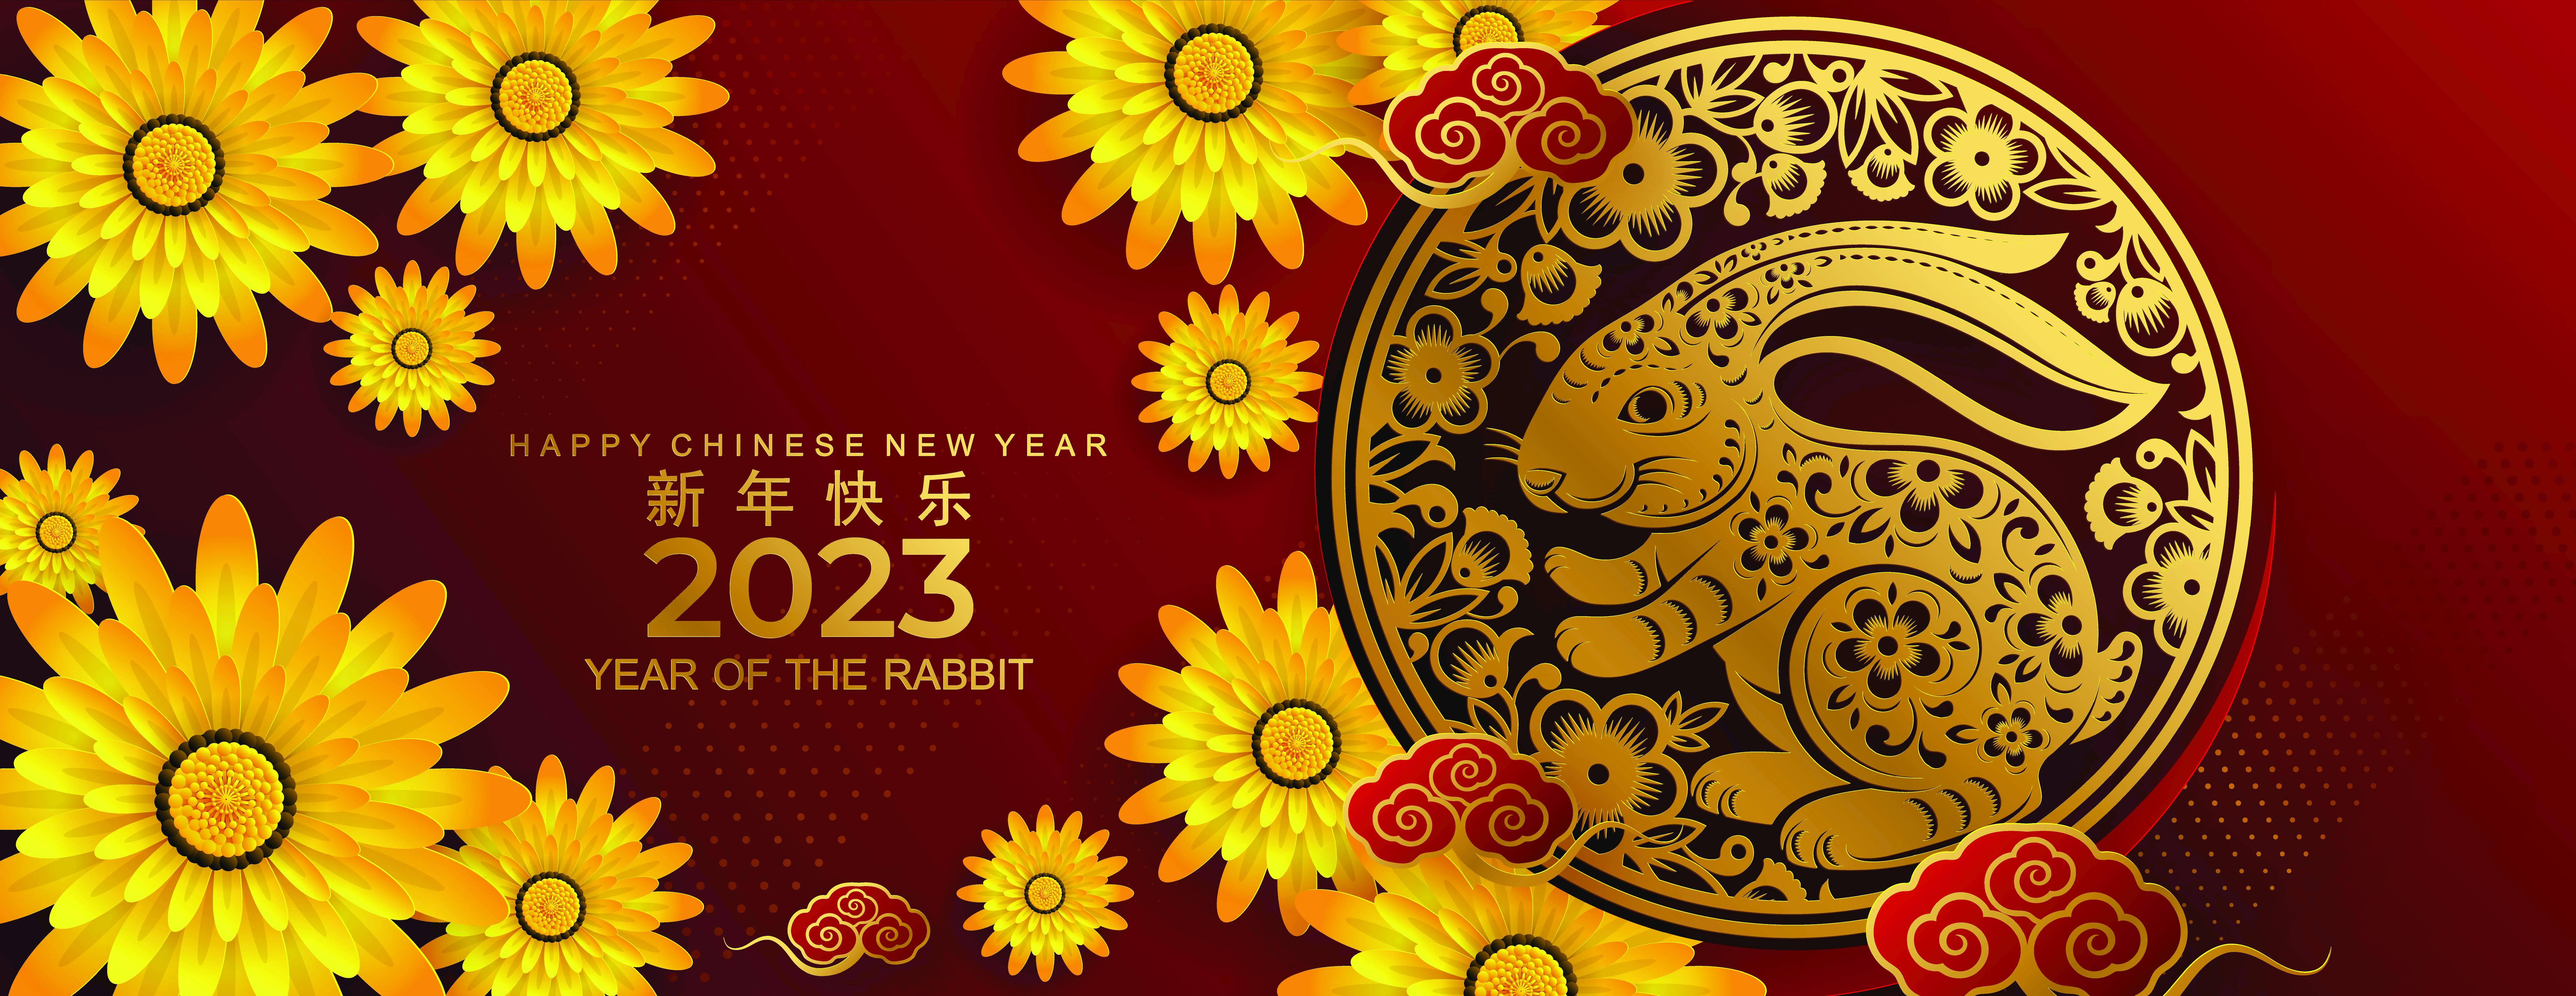 7 Chinese New Year Decorations That Bring Good Luck to Your Home